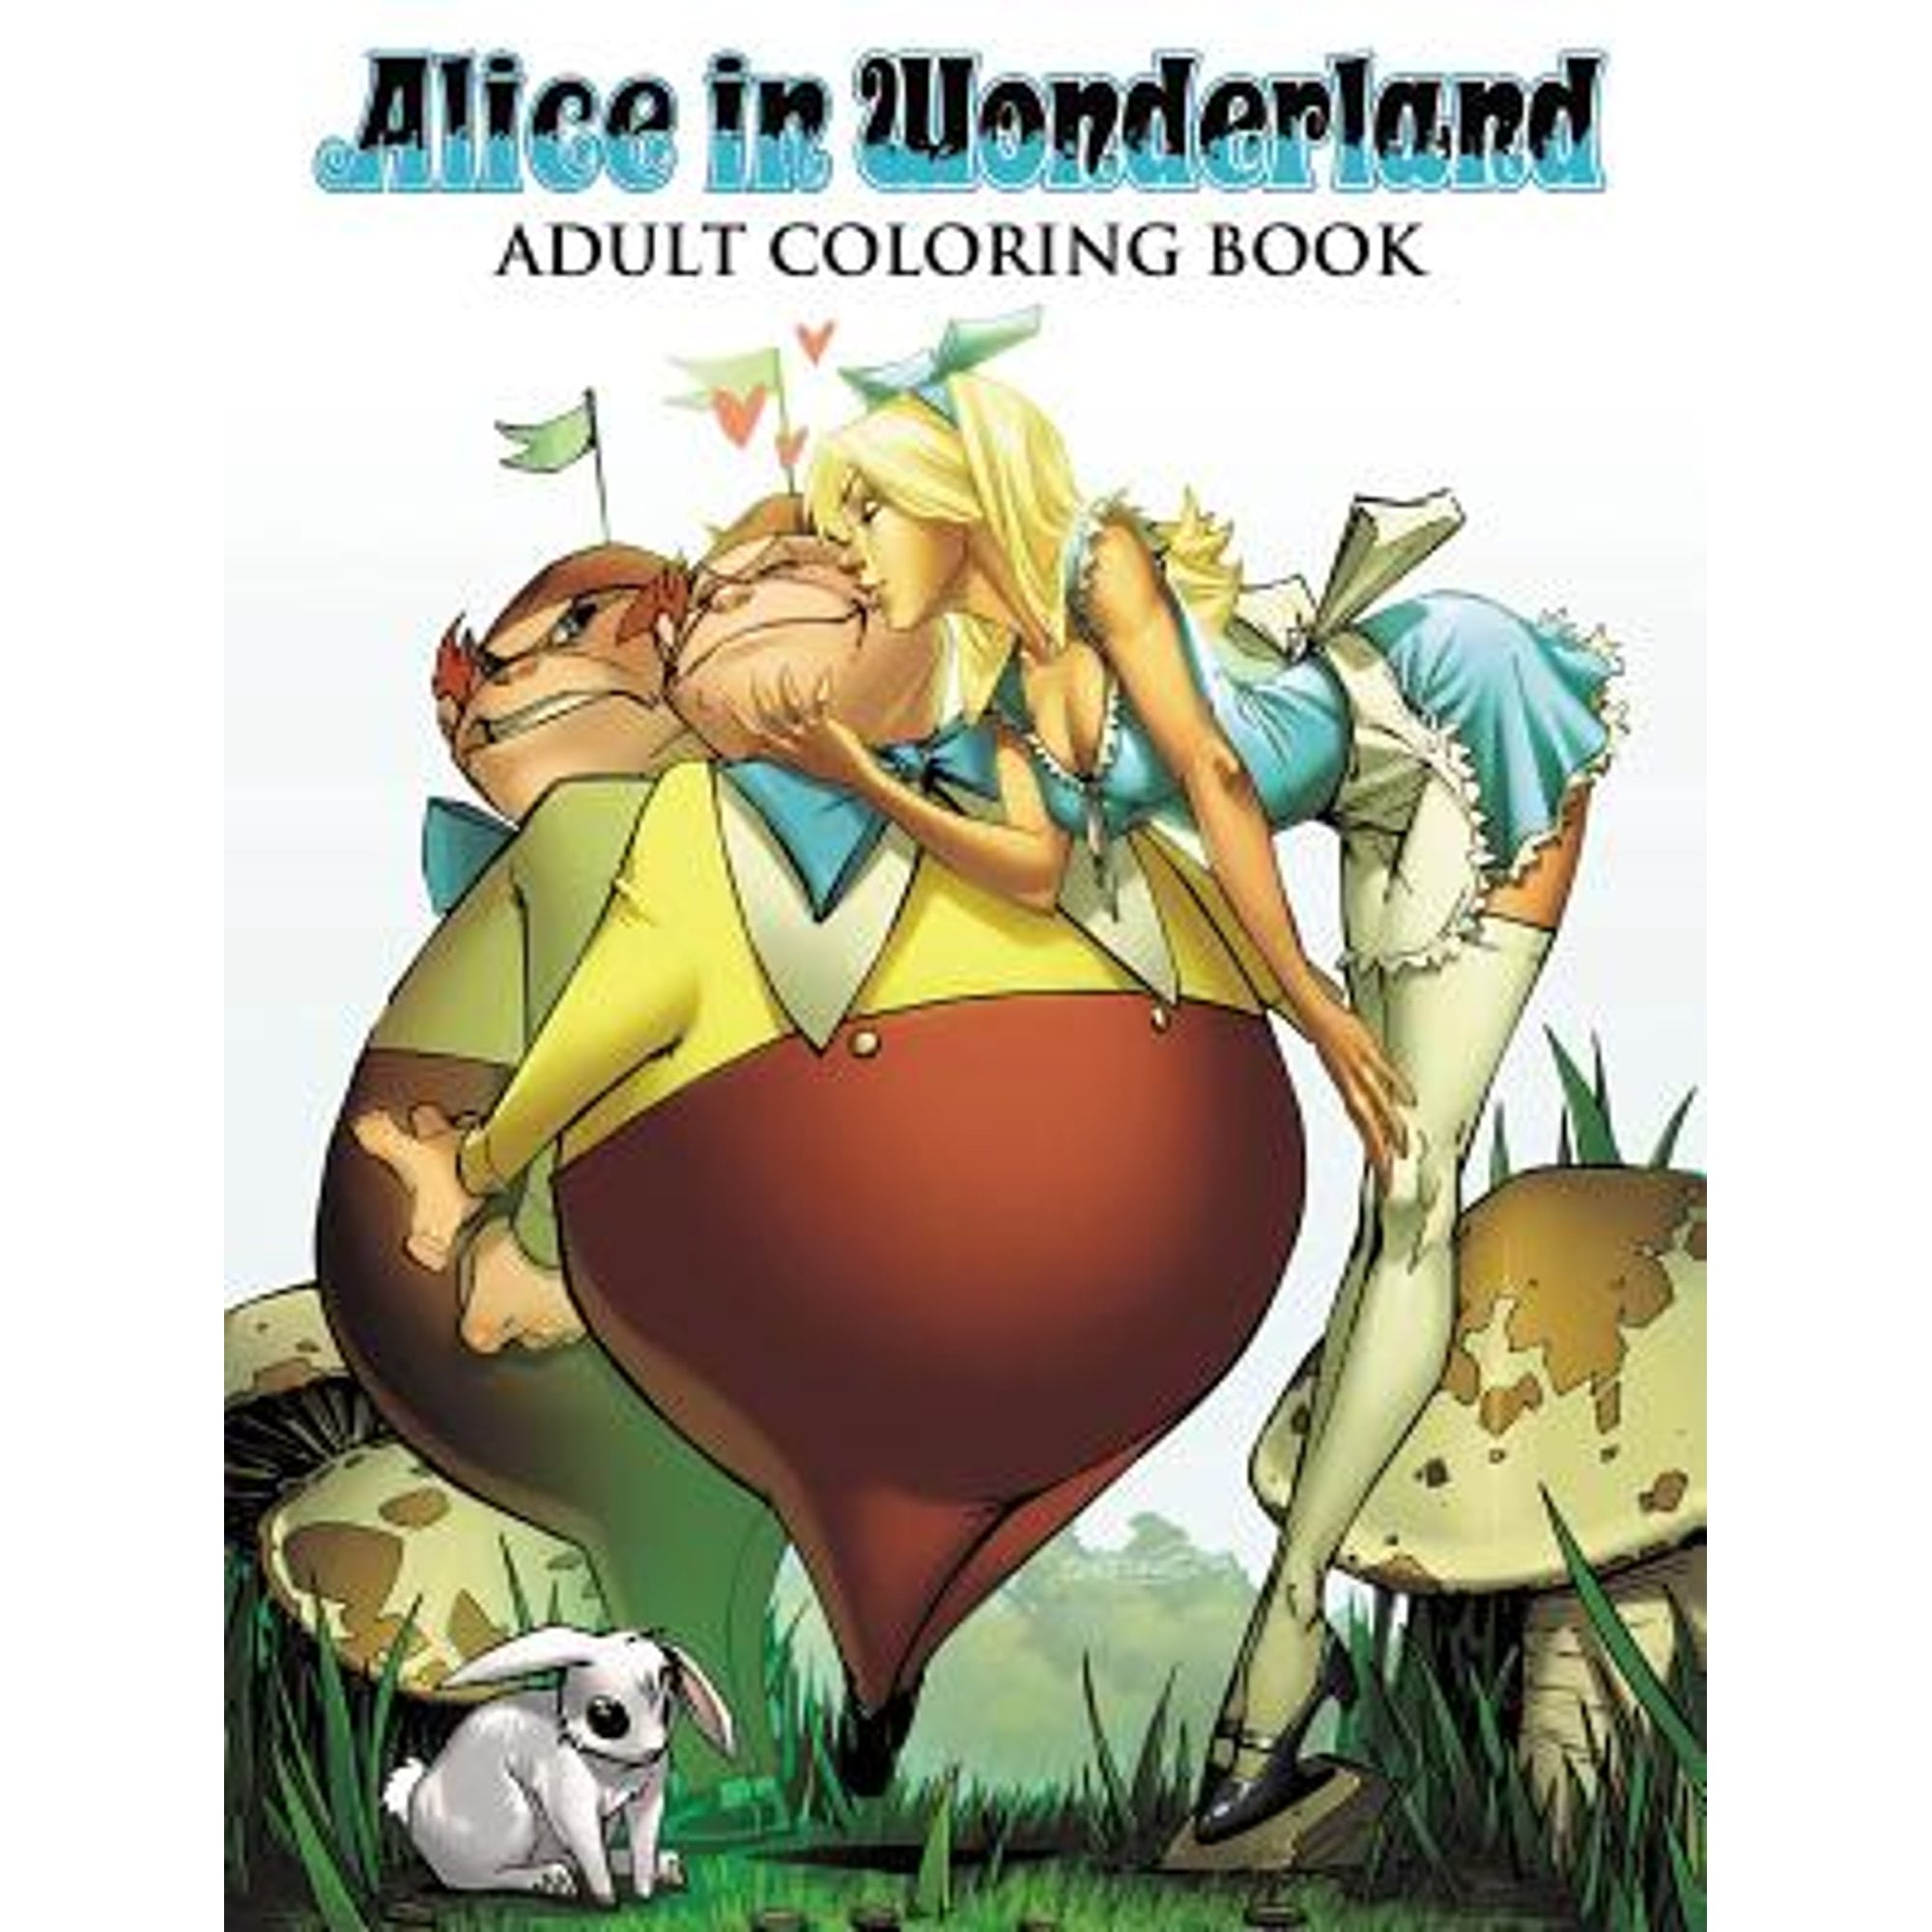 Pre-Owned Alice in Wonderland Adult Coloring Book (Paperback) by Joe Brusha, Ralph Tedesco, J. Scott Campbell